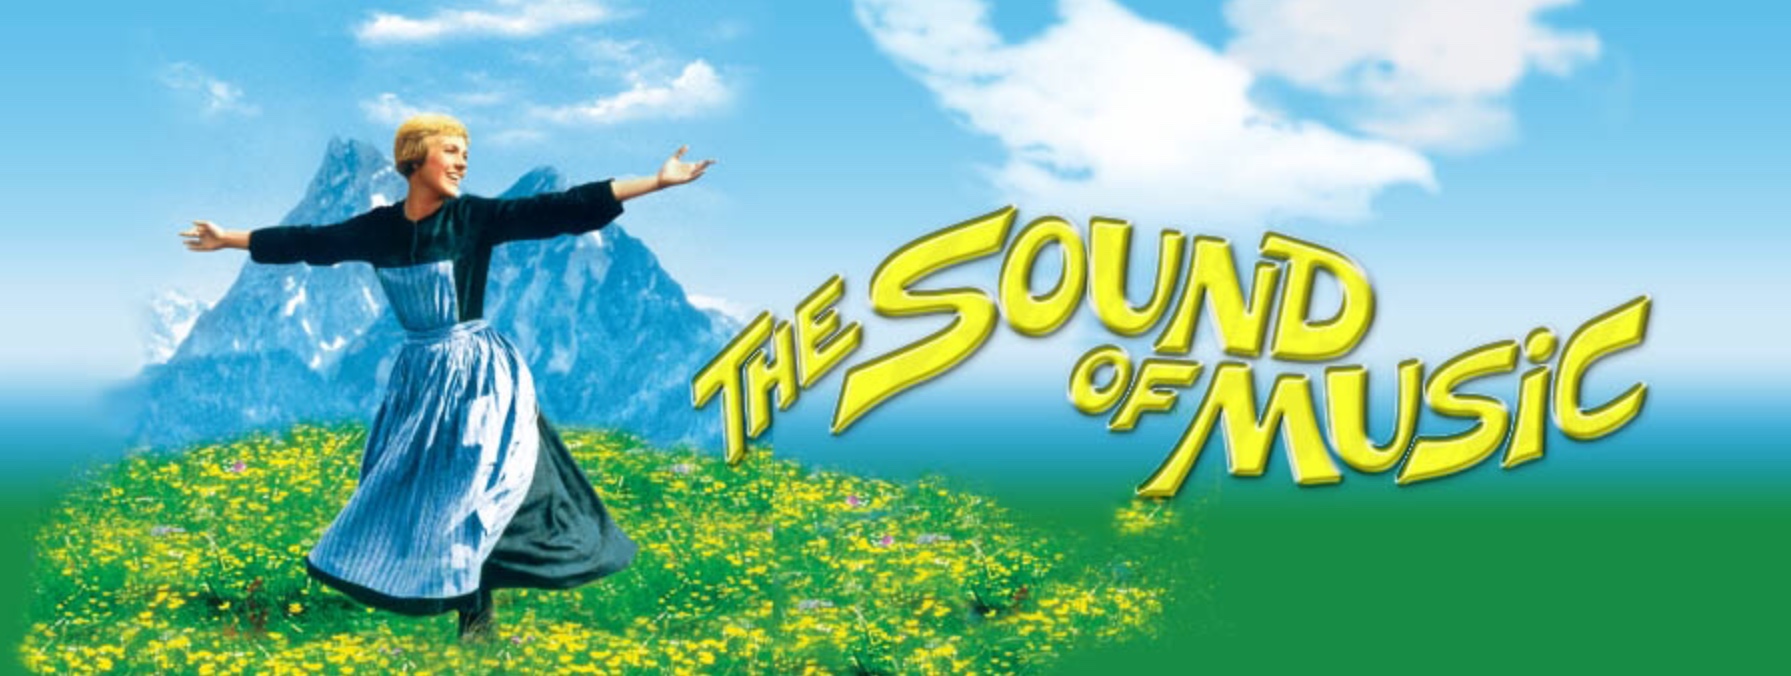 Salzburg: The famous "Sound of Music" film poster.